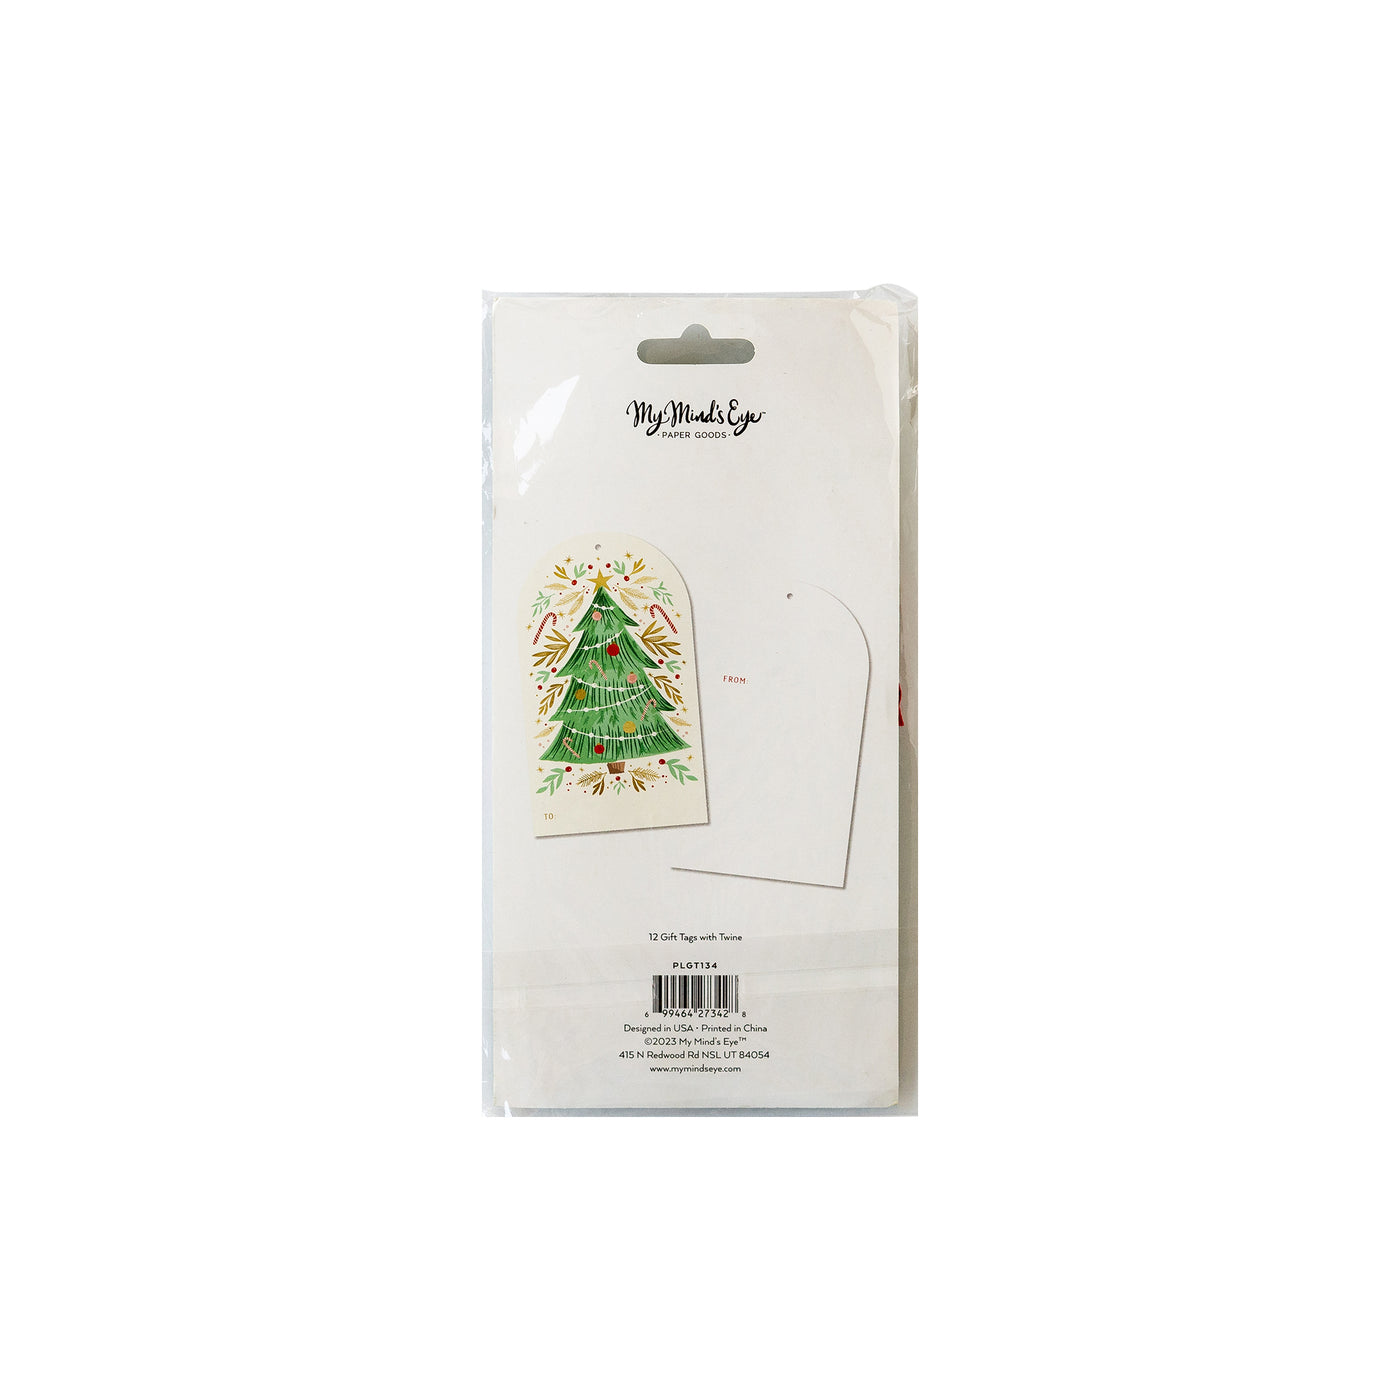 PLGT134 - Golden Christmas Tree Over-sized Tags